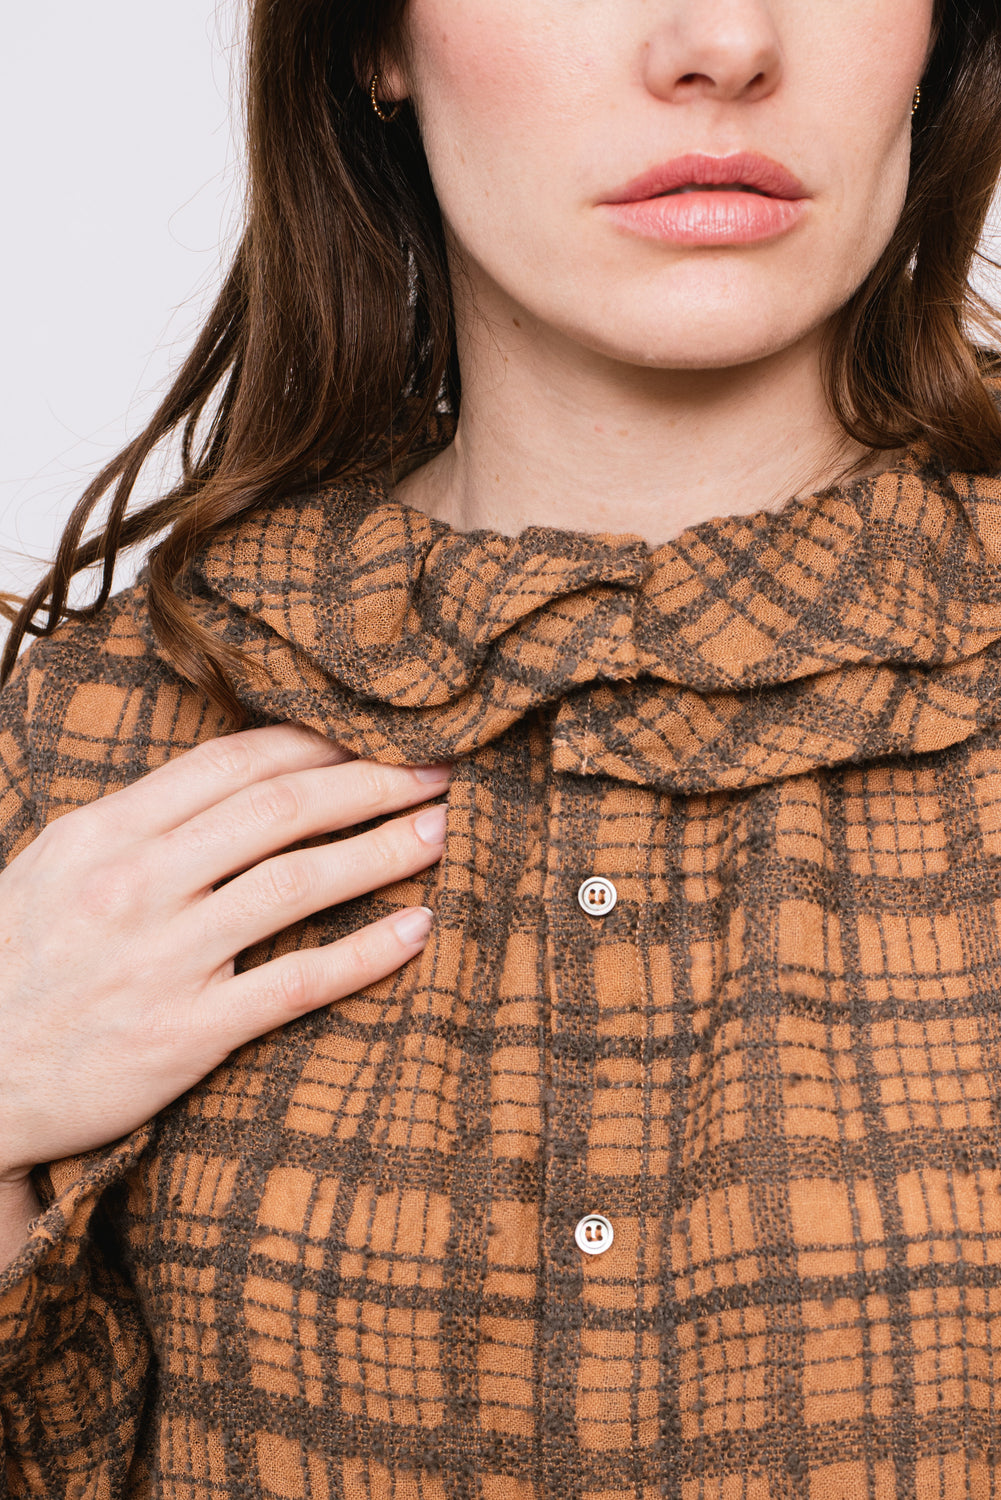 Wool Check Frill Blouse, Terracotta